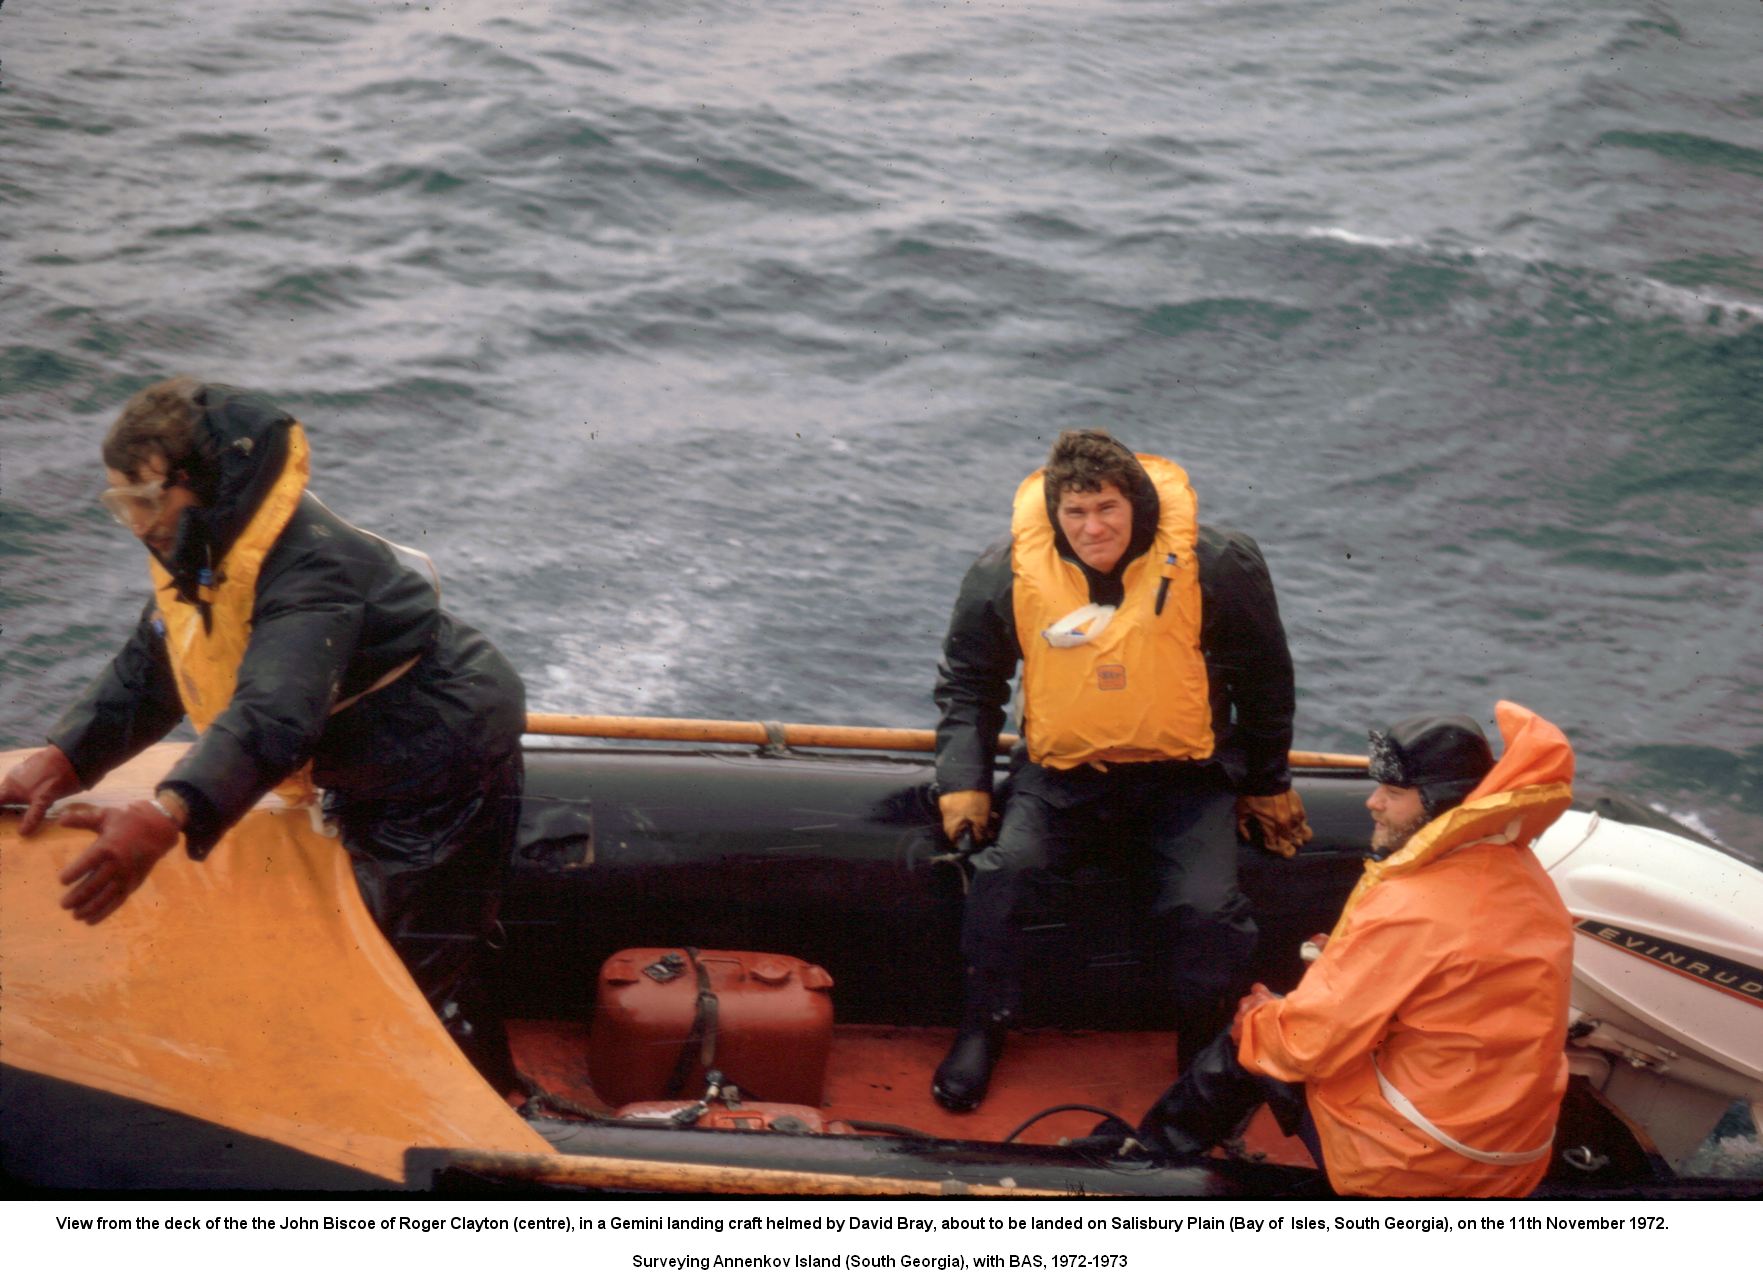 View from the deck of the the John Biscoe of Roger Clayton (centre), in a Gemini landing craft helmed by David Bray, about to be landed on Salisbury Plain (Bay of  Isles, South Georgia), on the 11th November 1972.